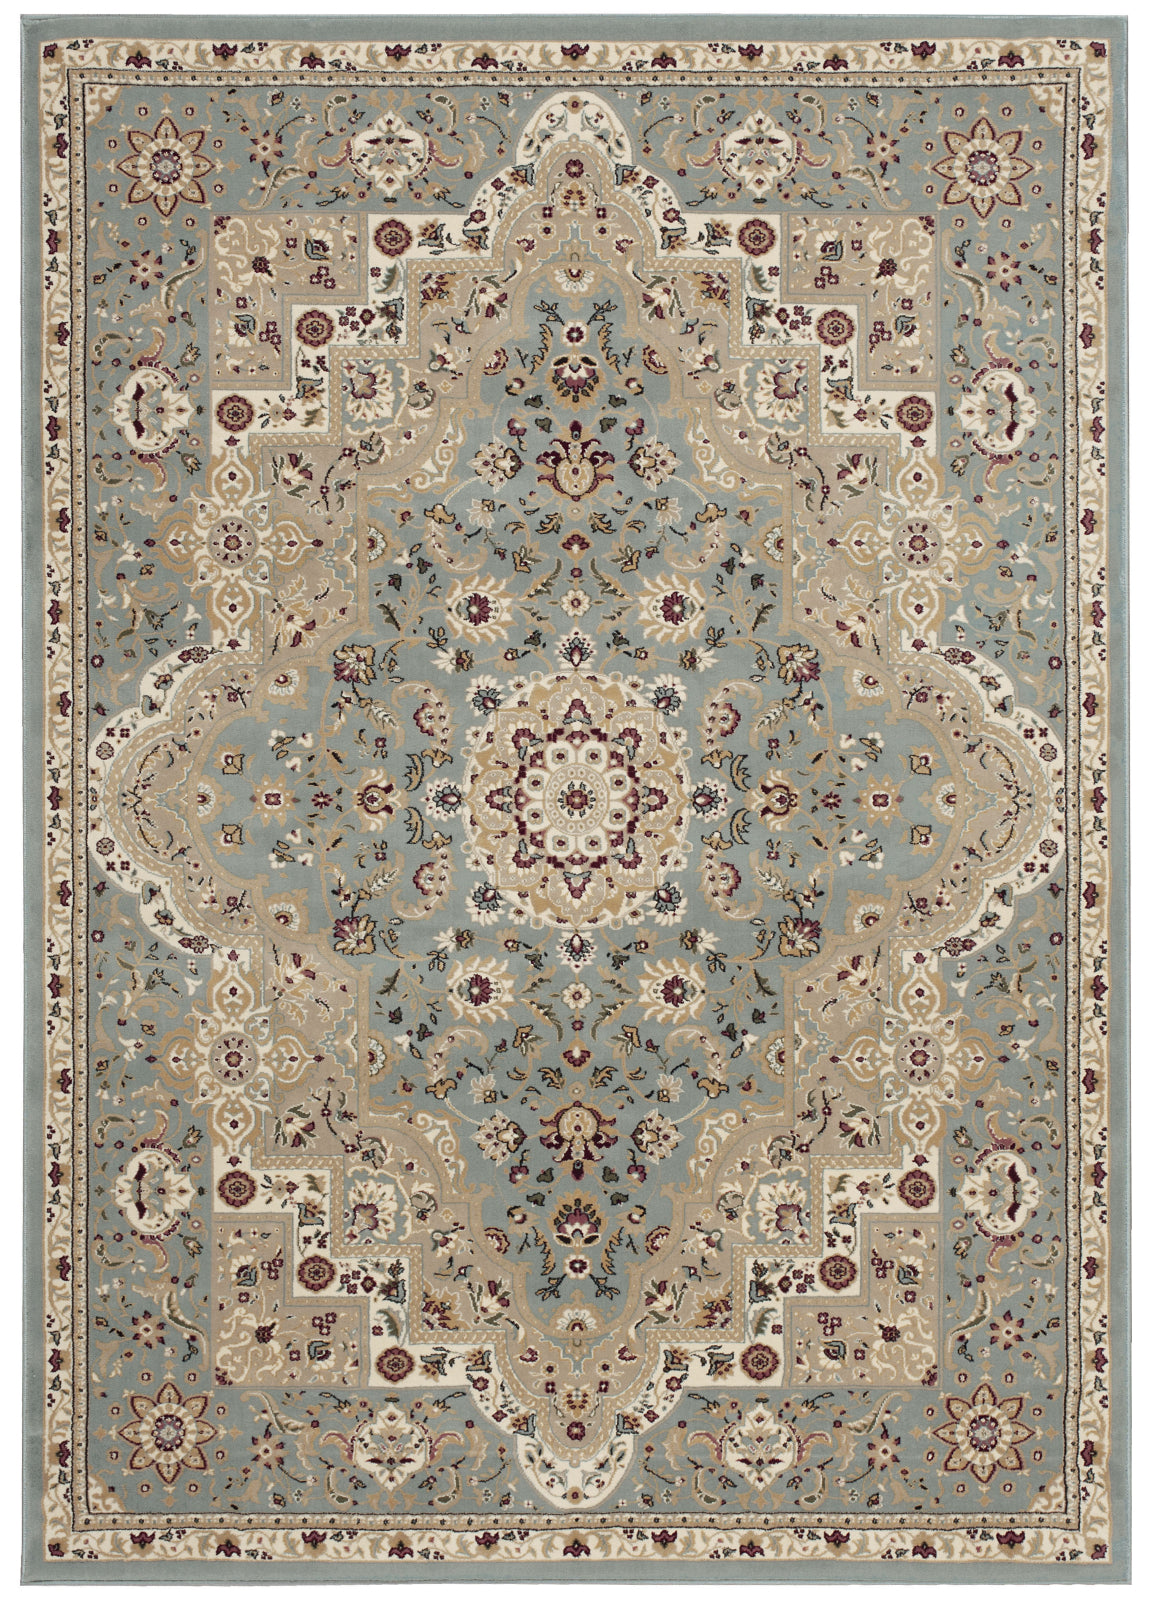 Nourison Antiquities ANT06 Imperial Garden Slate Blue Area Rug by Kathy Ireland main image